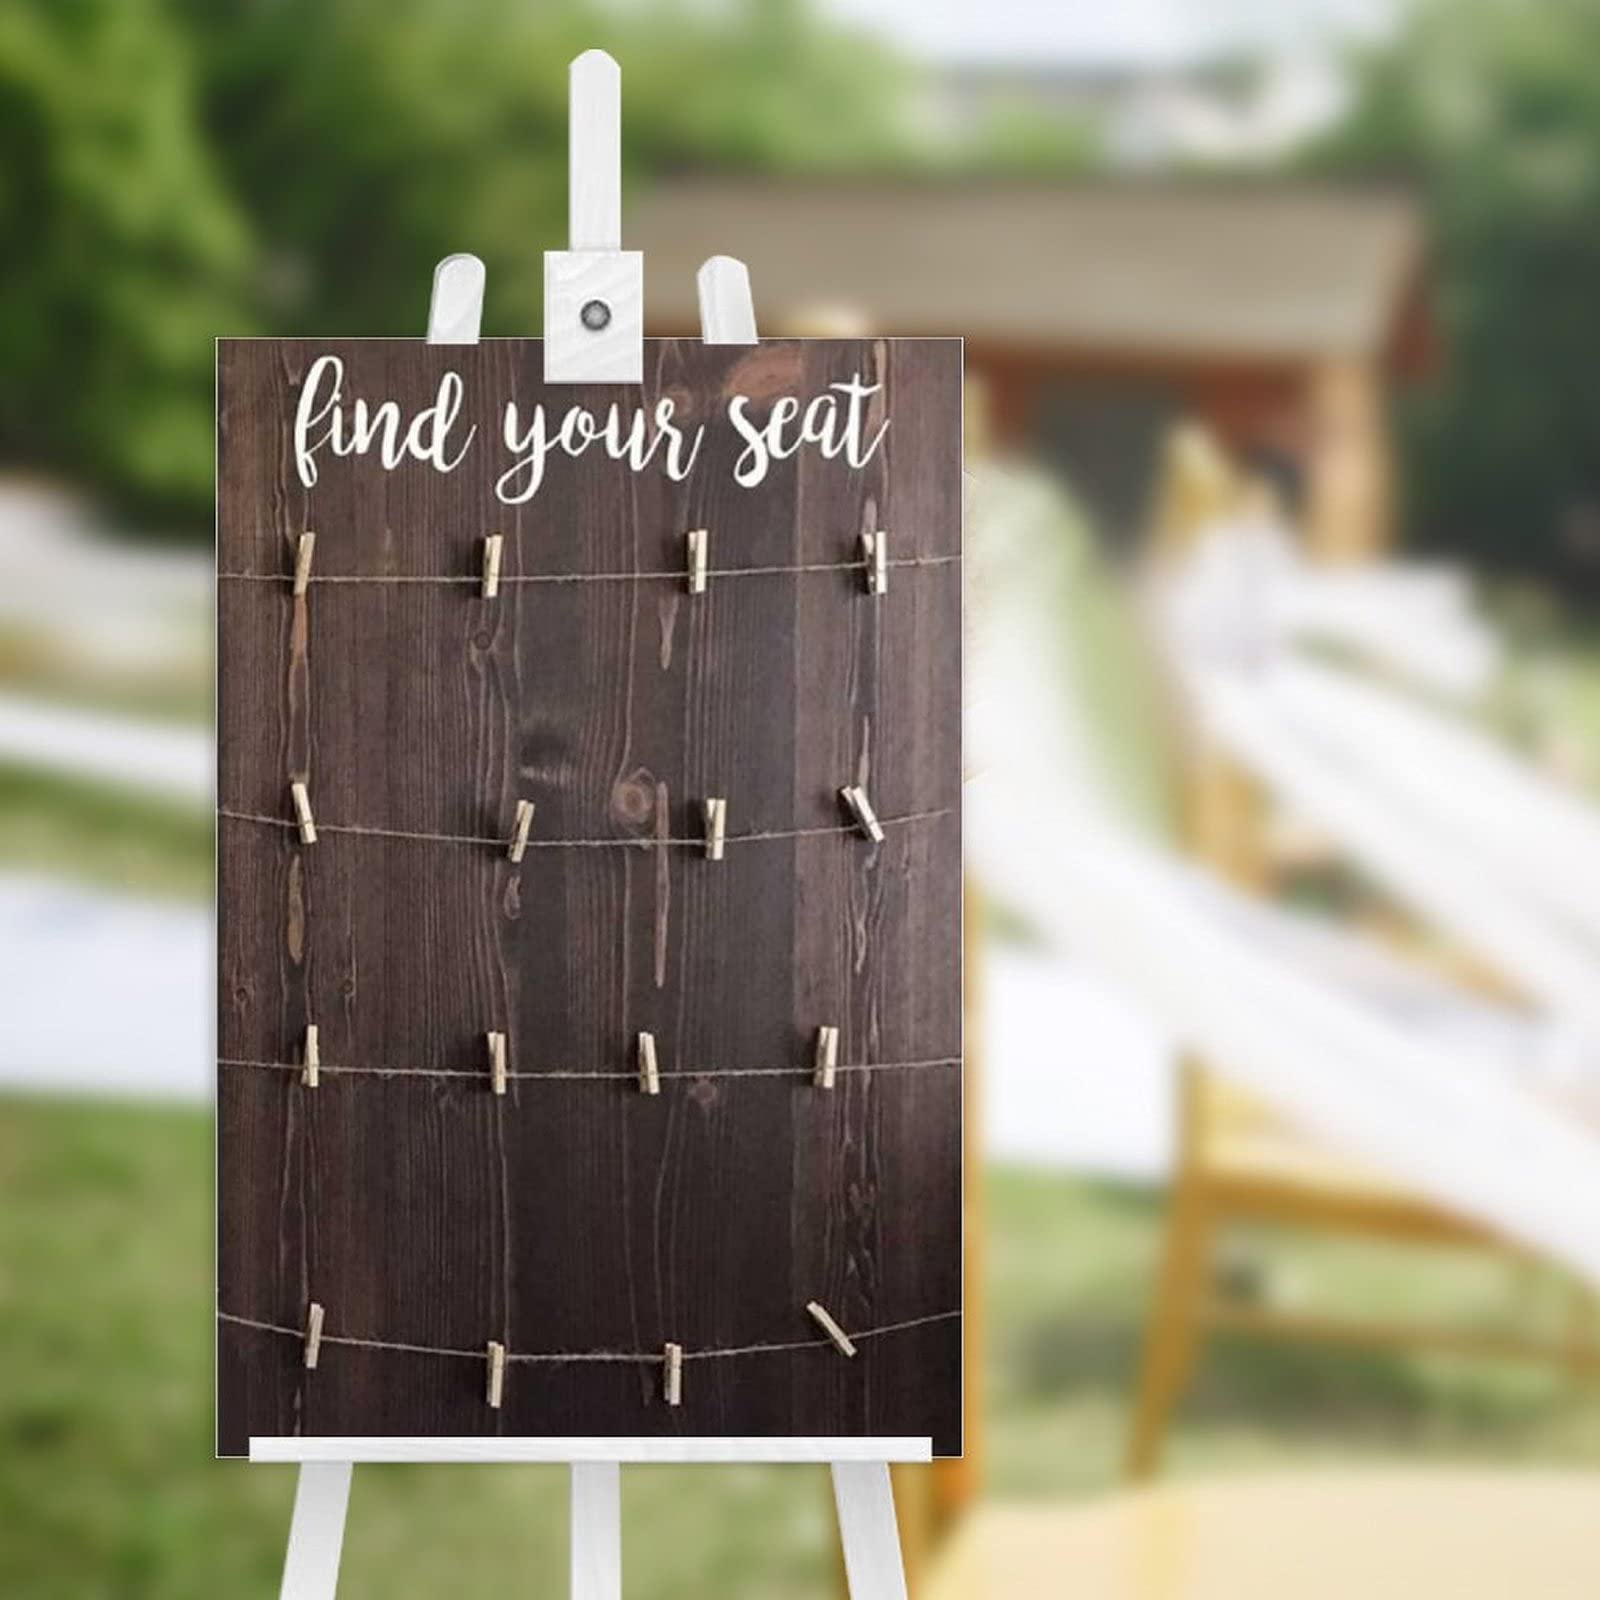 40x30cm， Find Your seat Wedding Seating Chart Board,Wedding Signs Wood,Wood Wedding Sign,find Your seat, Blank Seating Chart Board 824289